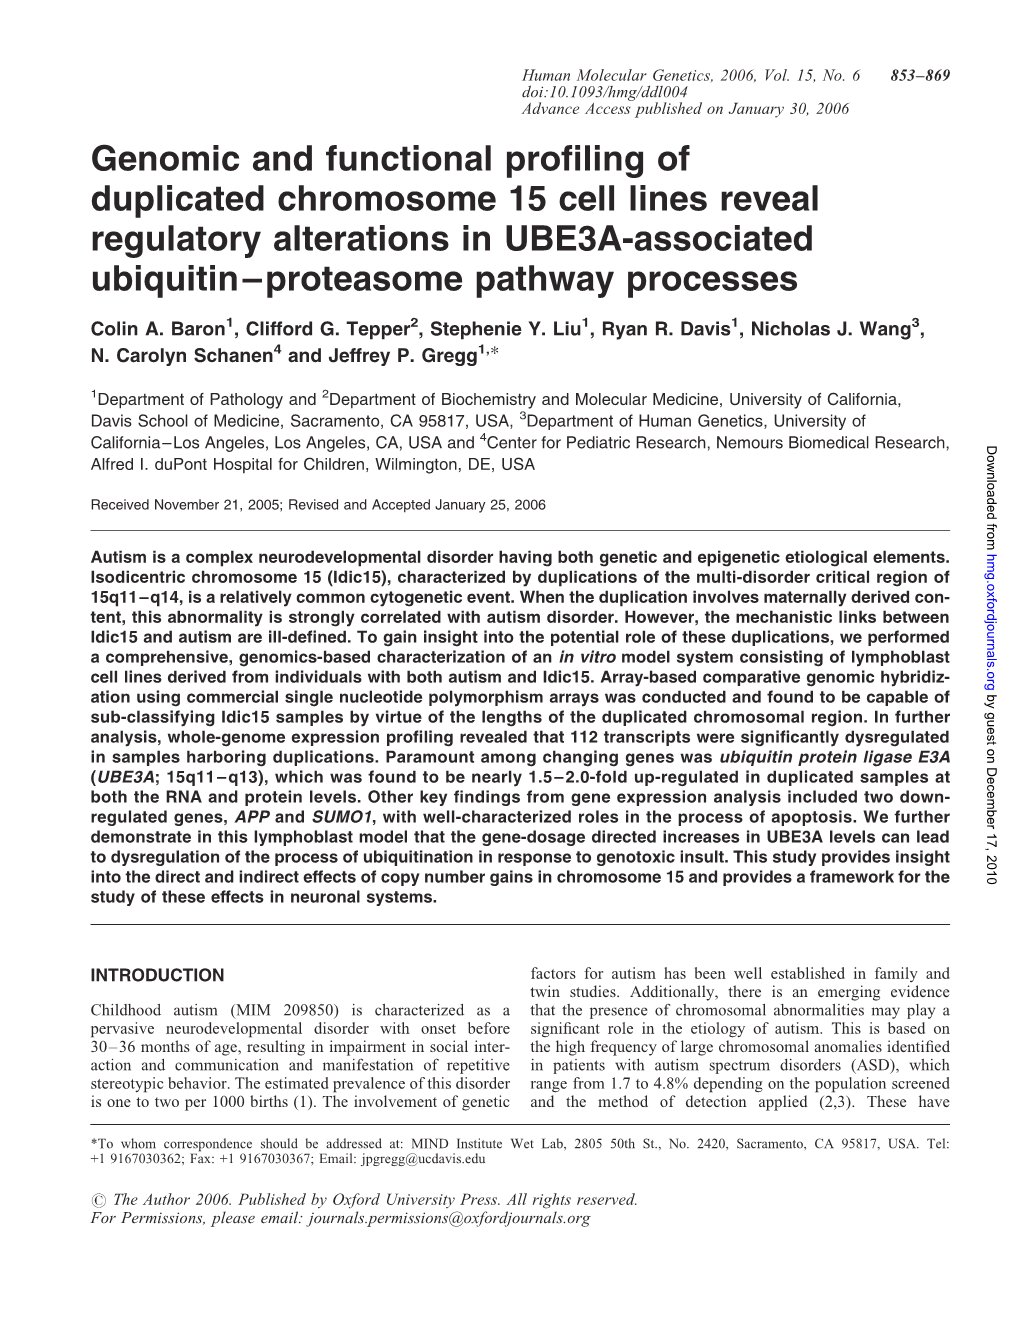 Genomic and Functional Profiling of Duplicated Chromosome